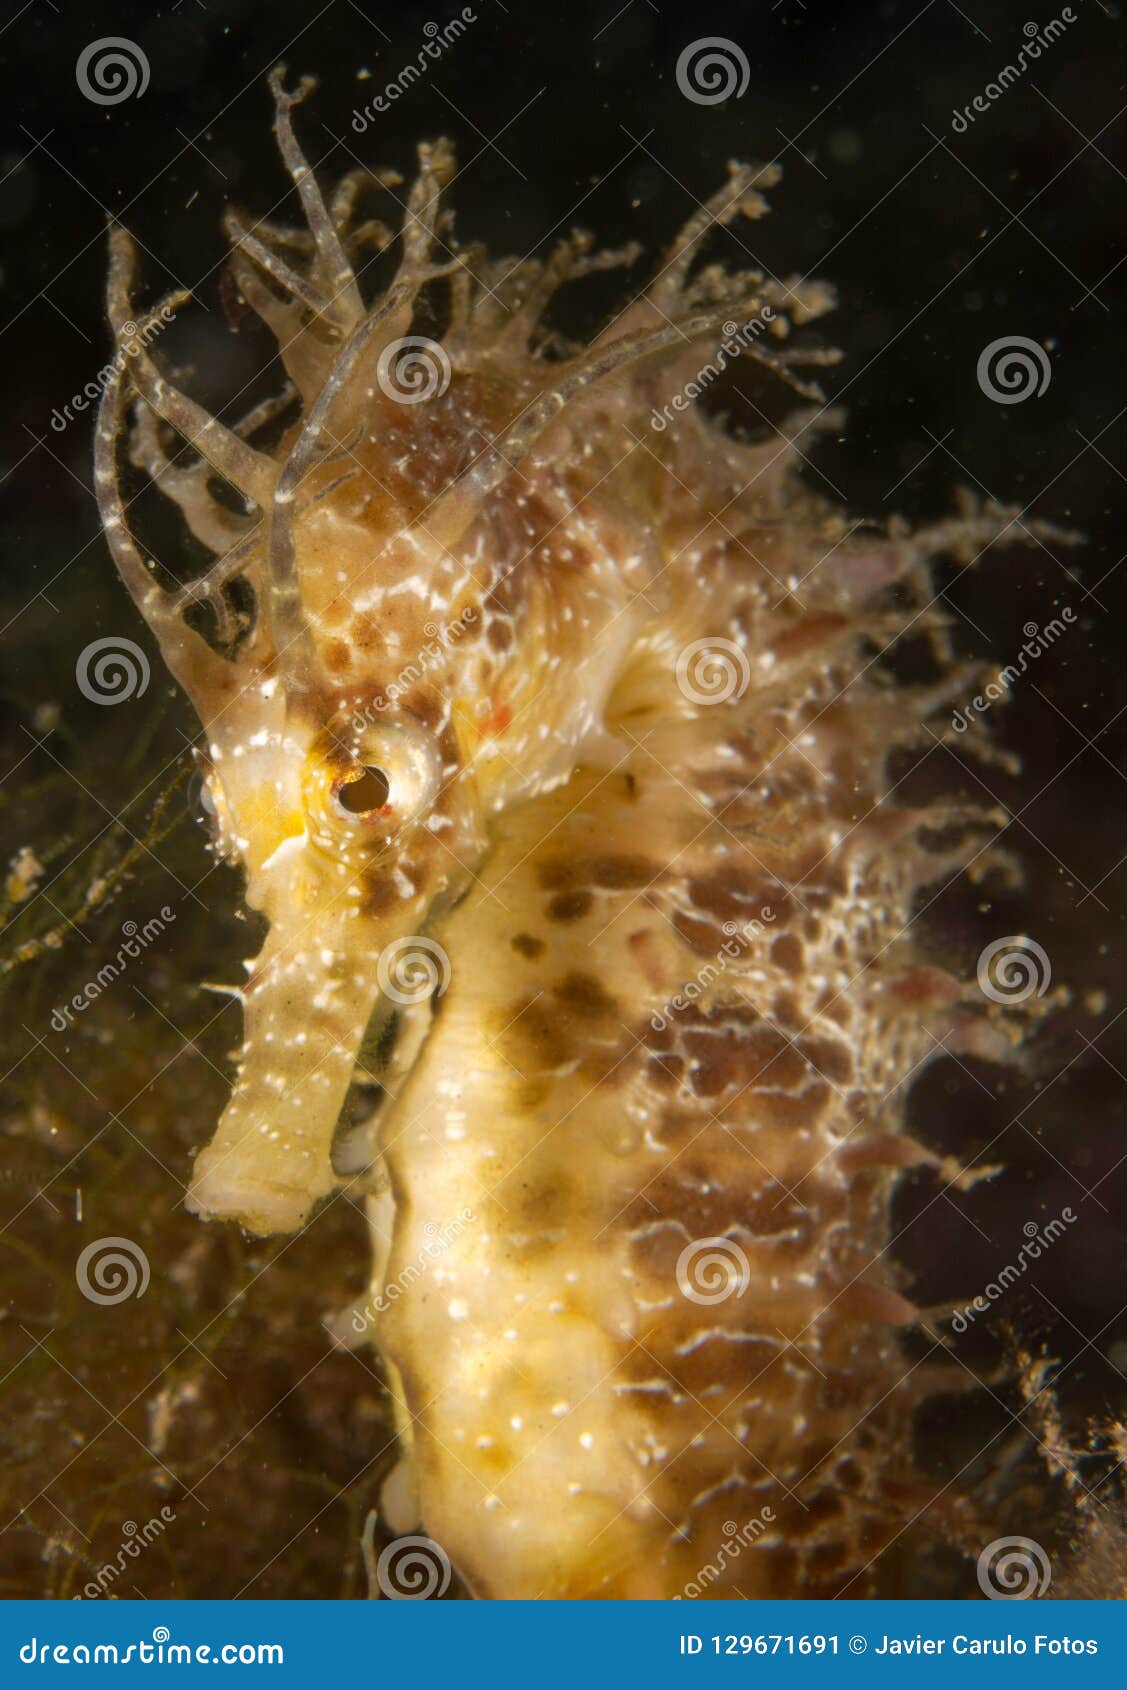 seahorse in the mediterranean, costa brava in the foreground and with black background